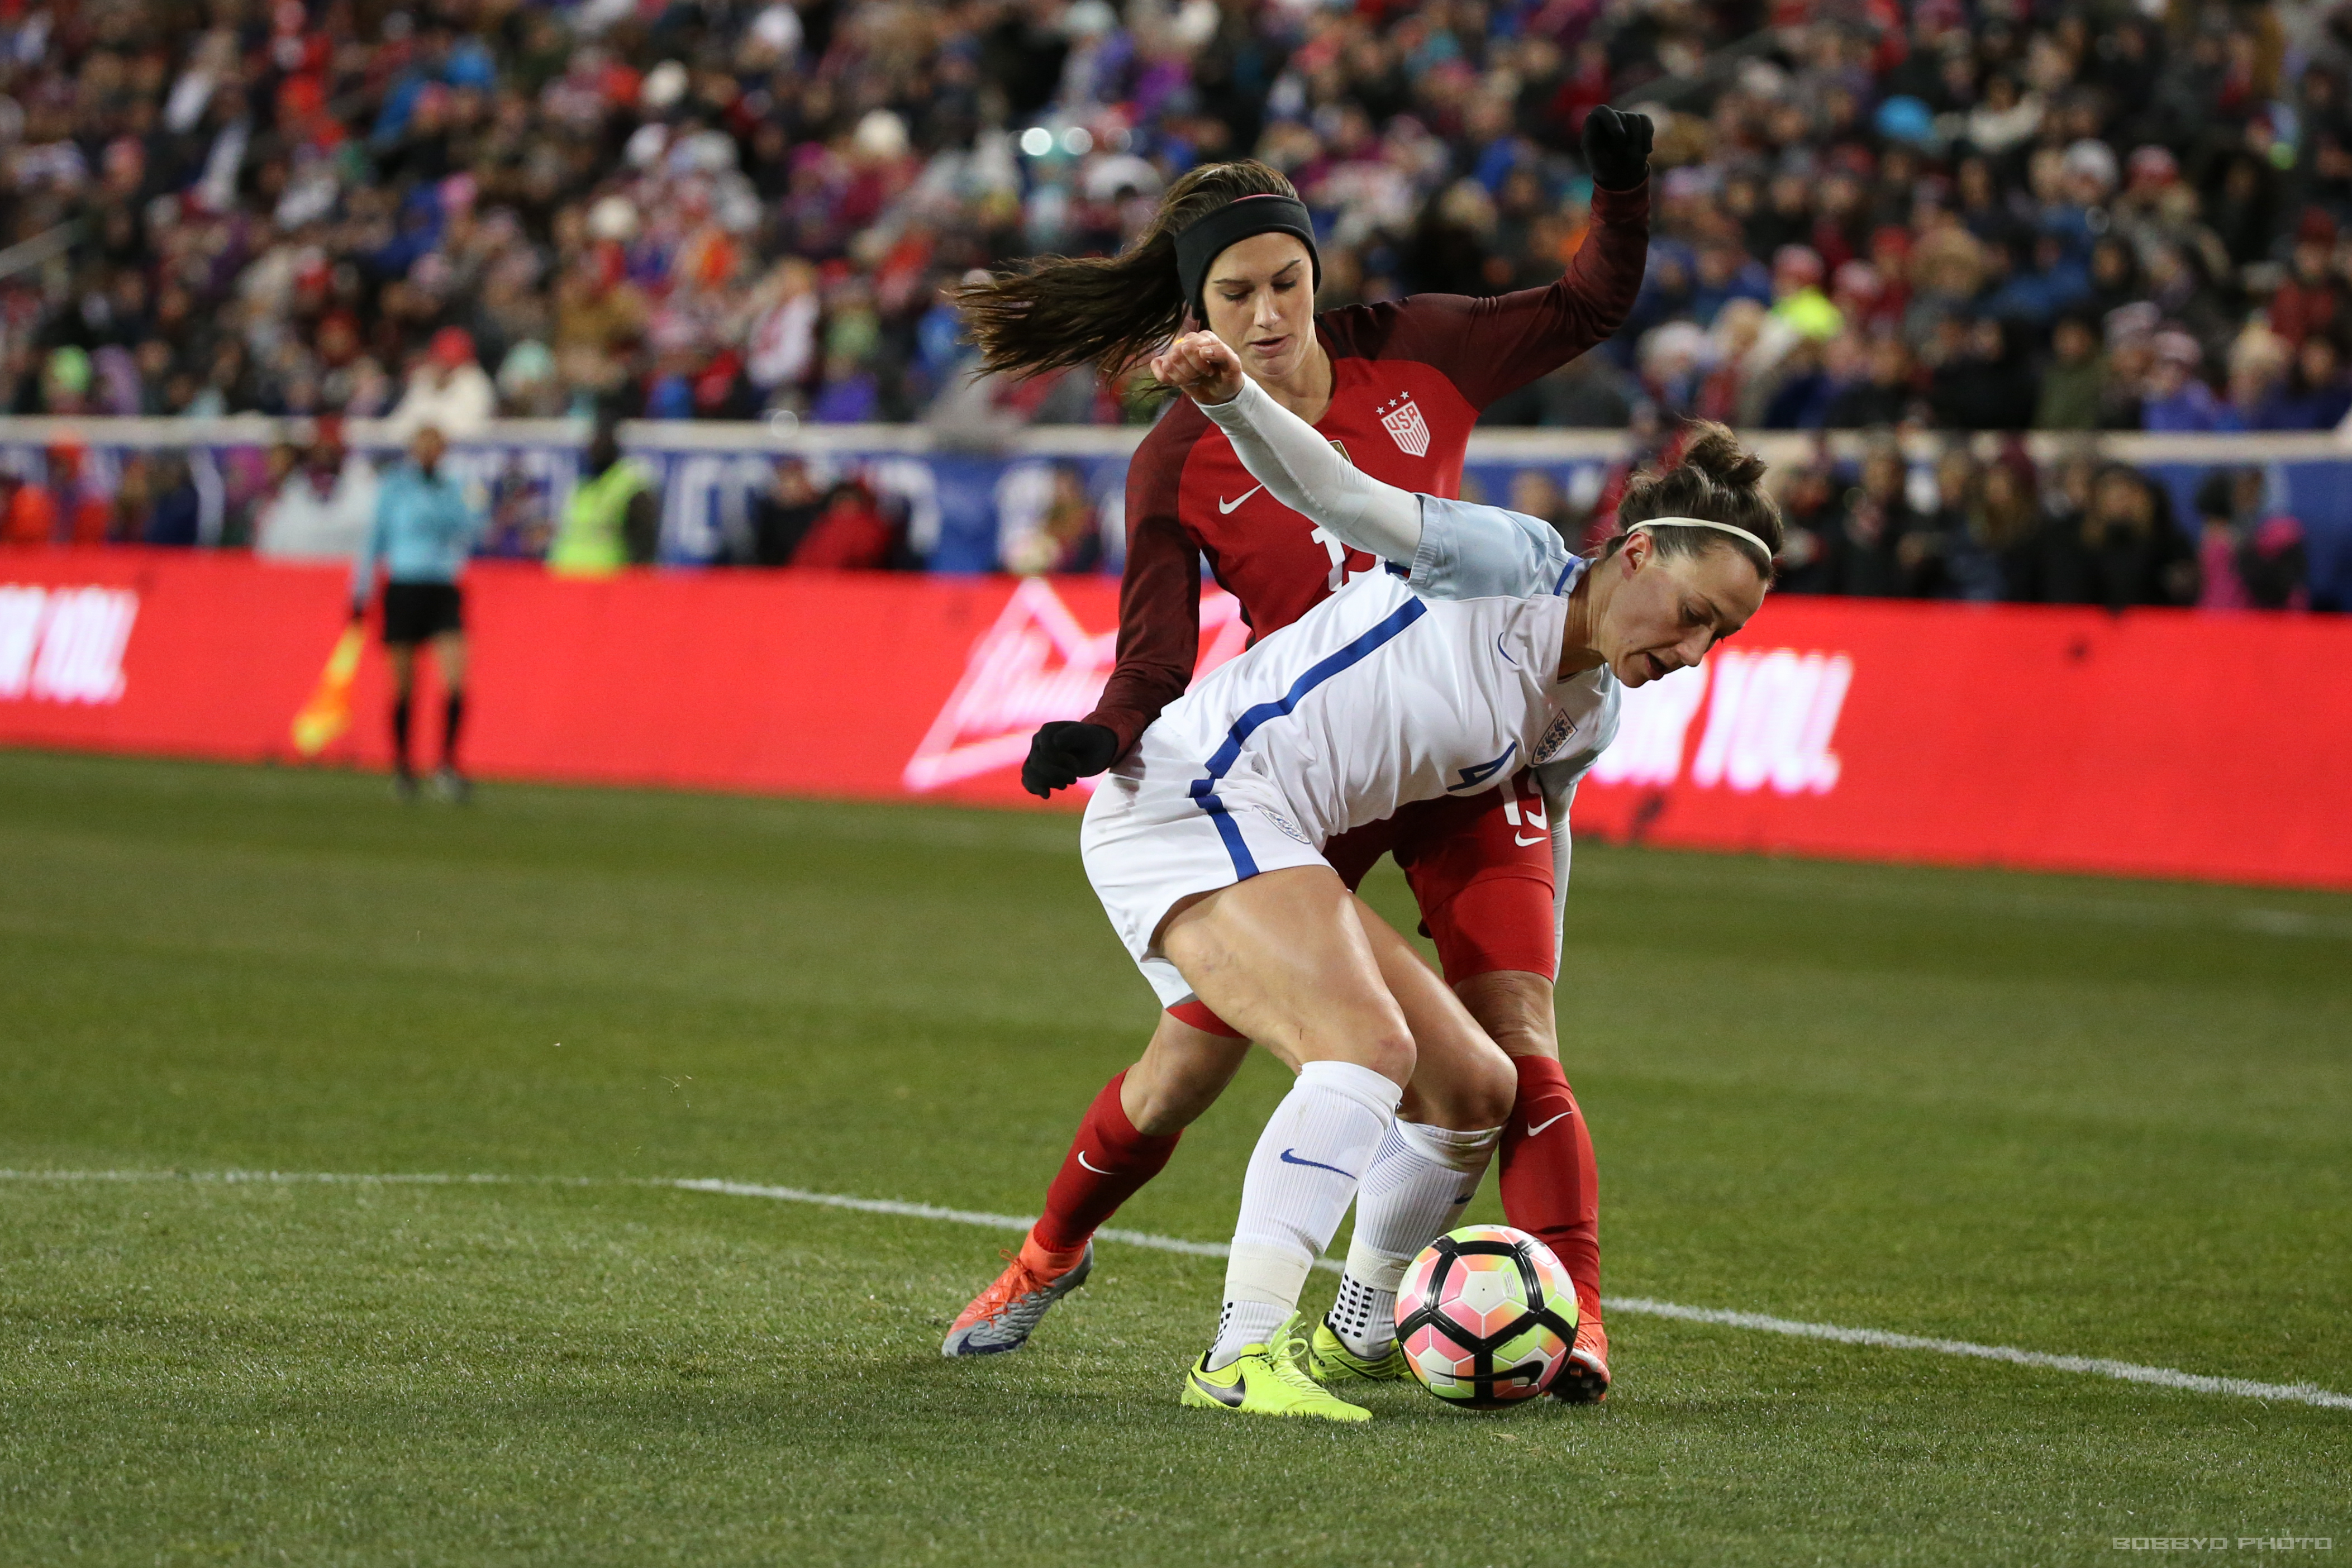 Alex Morgan dribbles through a defender in the first half. Photo (Bobby O'Hara/ PuresportsNY)